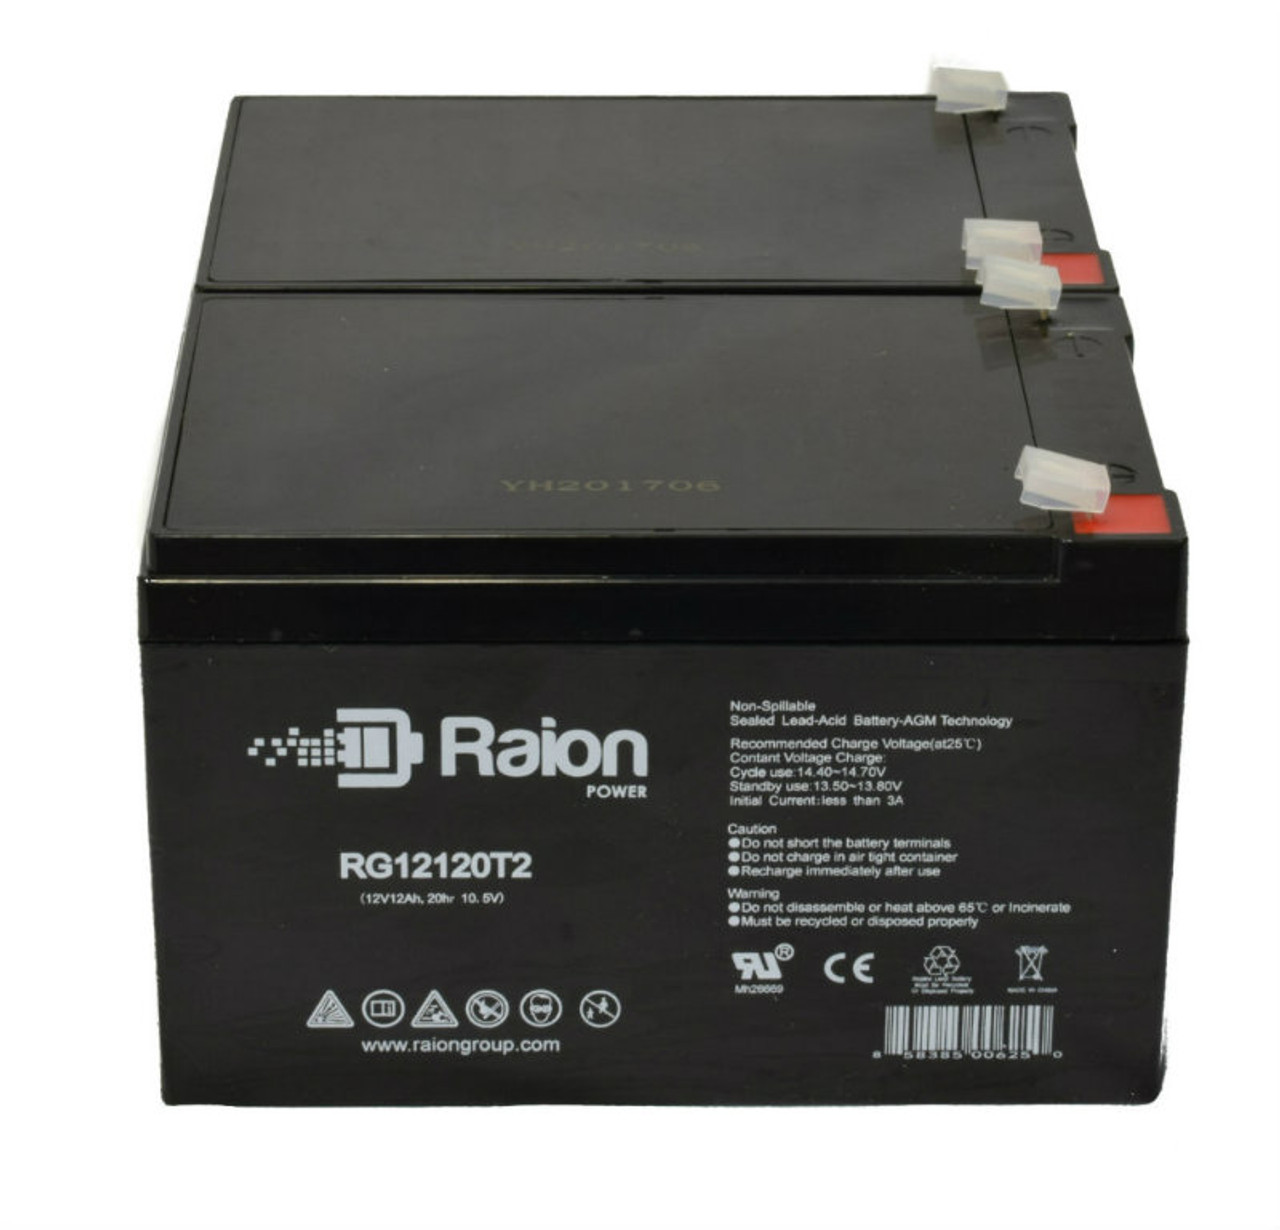 Raion Power 12V 12Ah Non-Spillable Compatible Replacement Battery for National Power GT050R4 - (2 Pack)